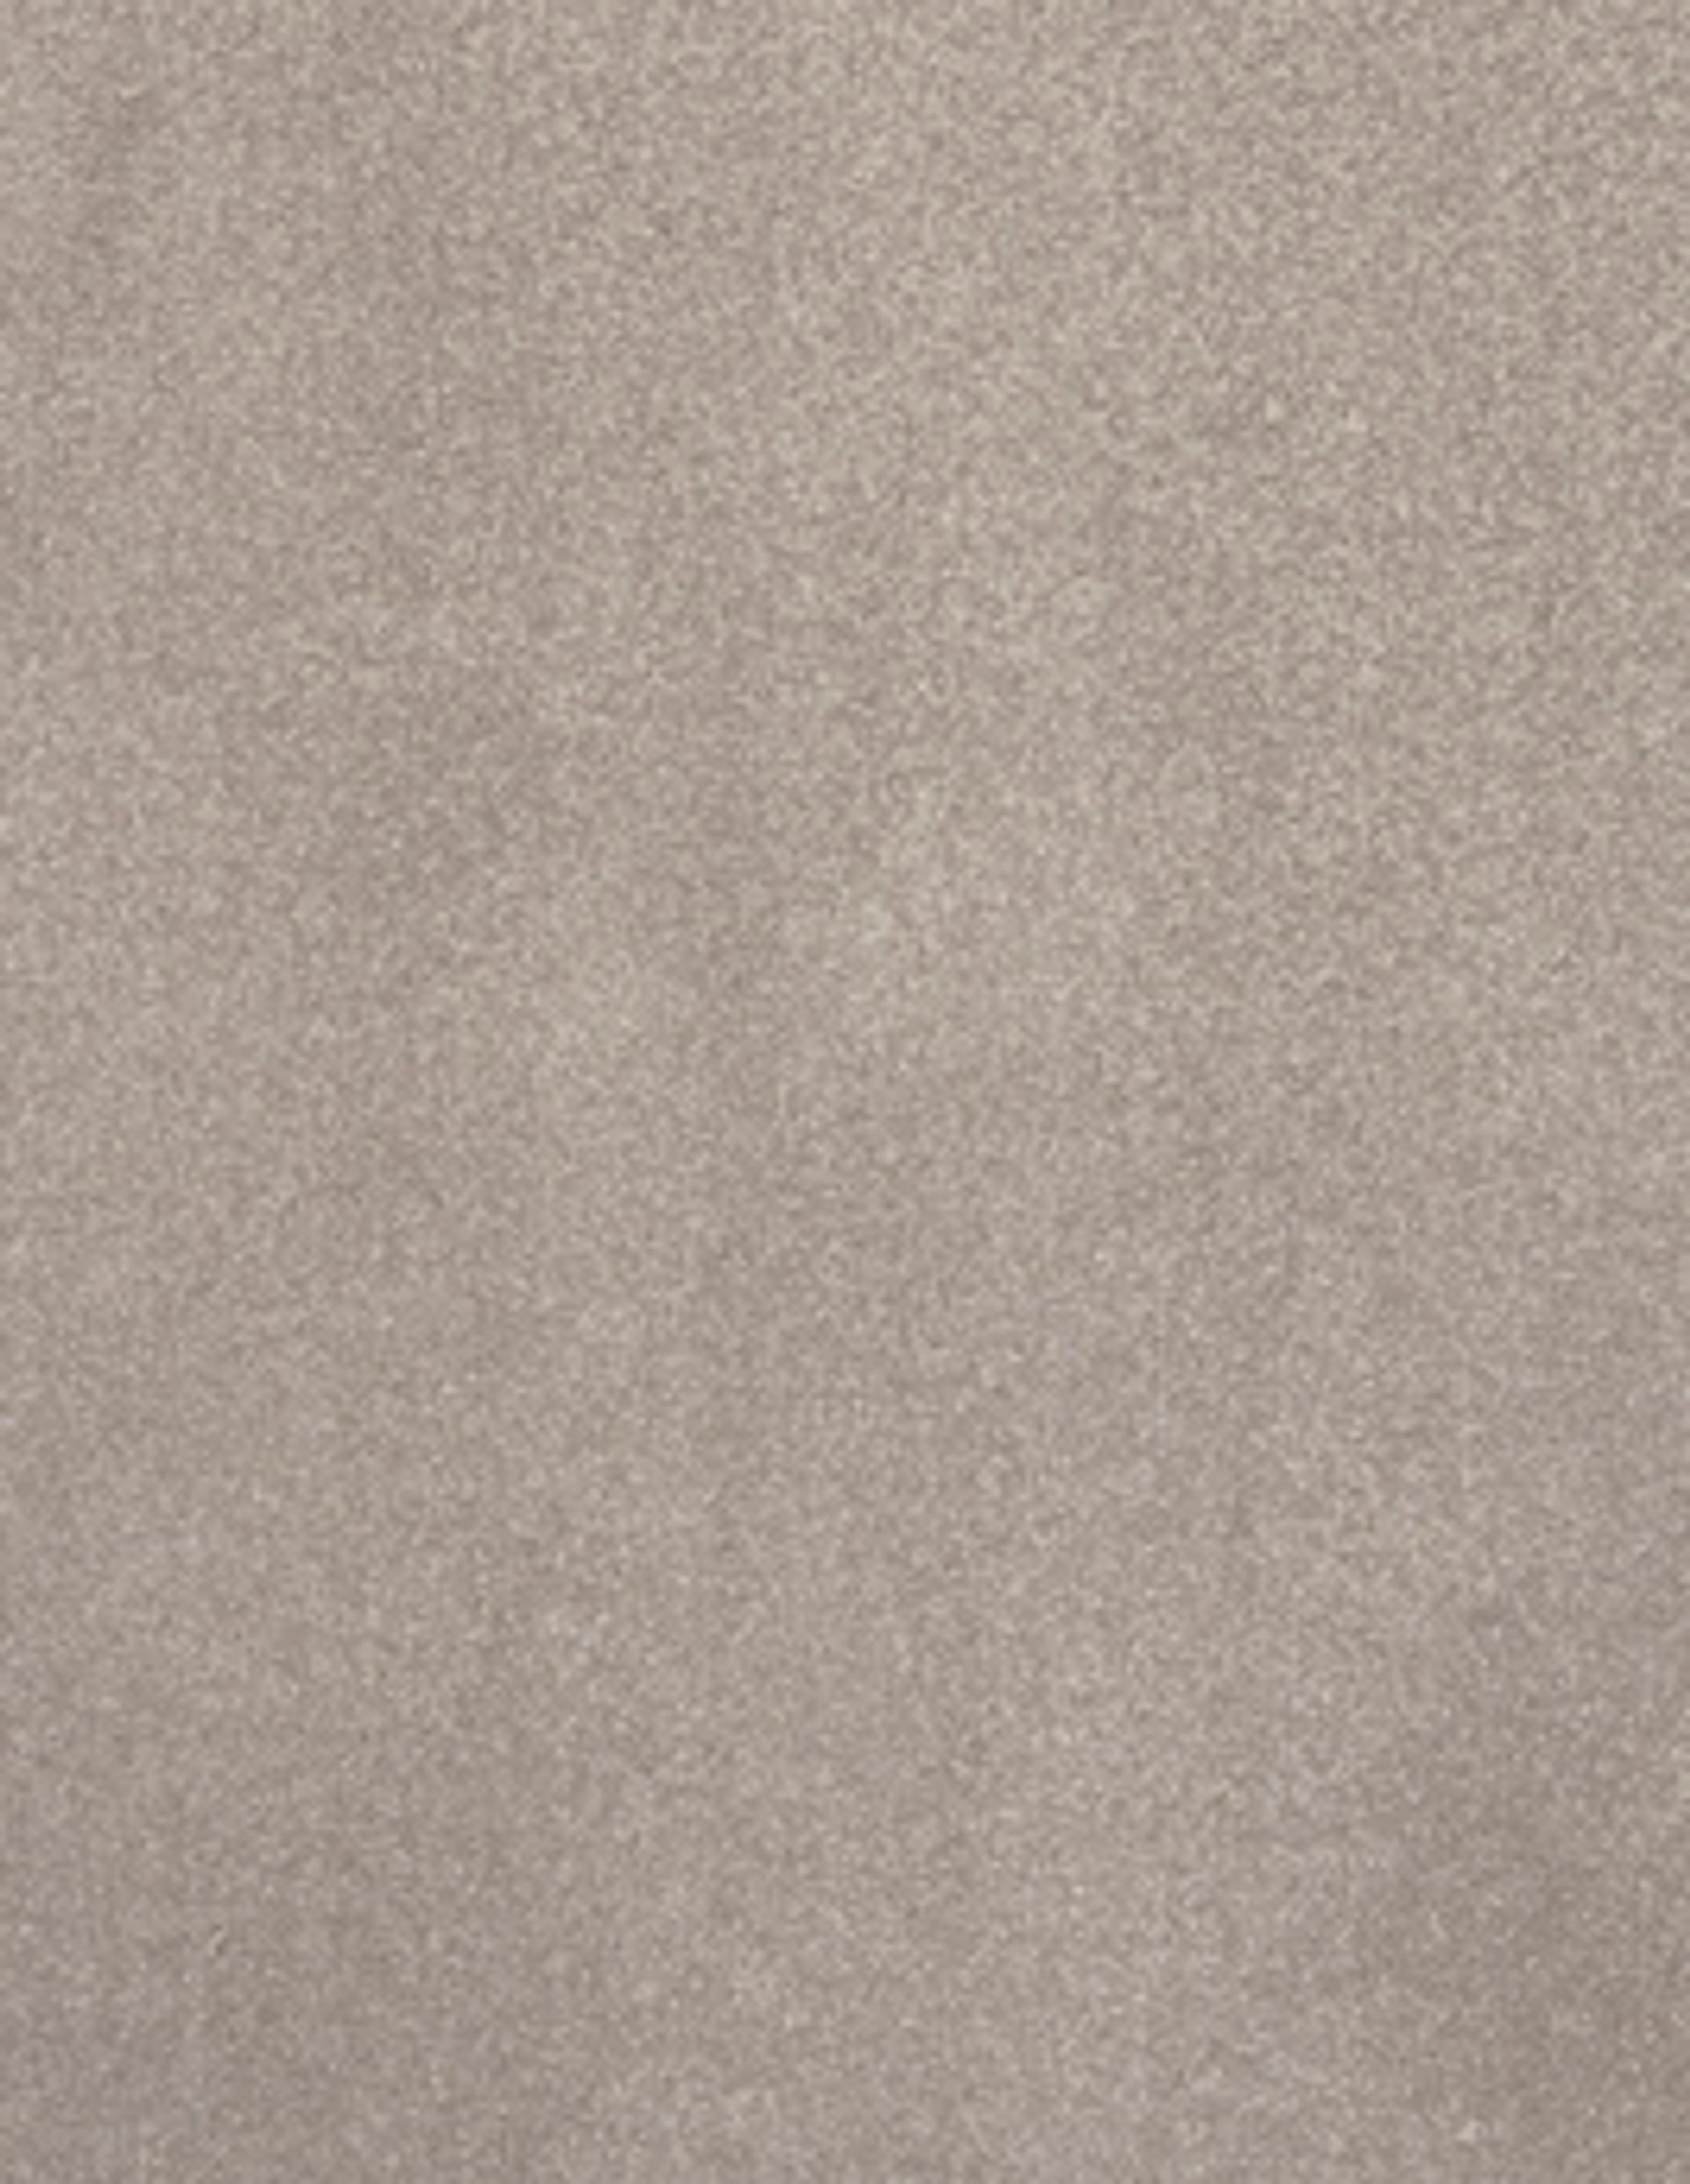 Moquette shaggy SATISFACTION 5M, col taupe, rouleau 5.00 m